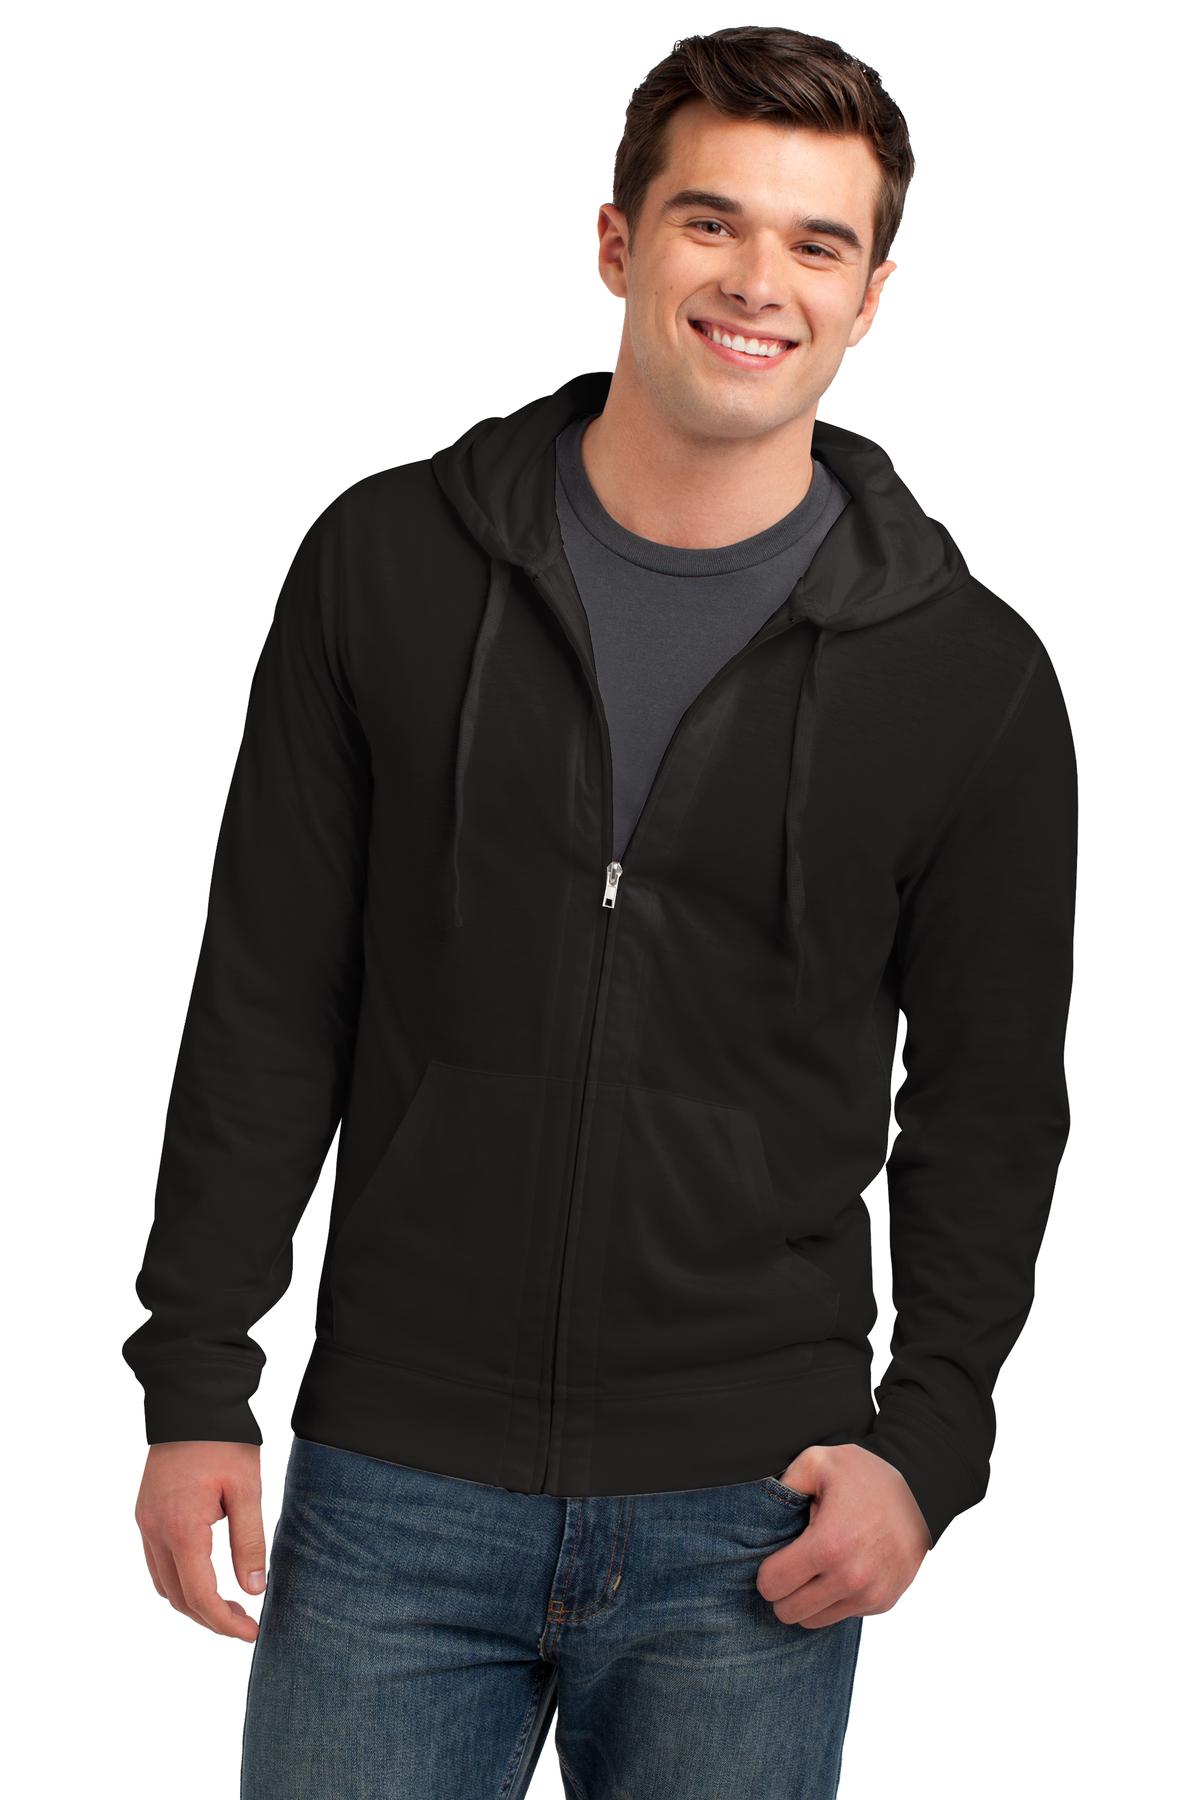 District Young Mens Jersey Full Zip Hoodie-3XL (Black) - image 1 of 6